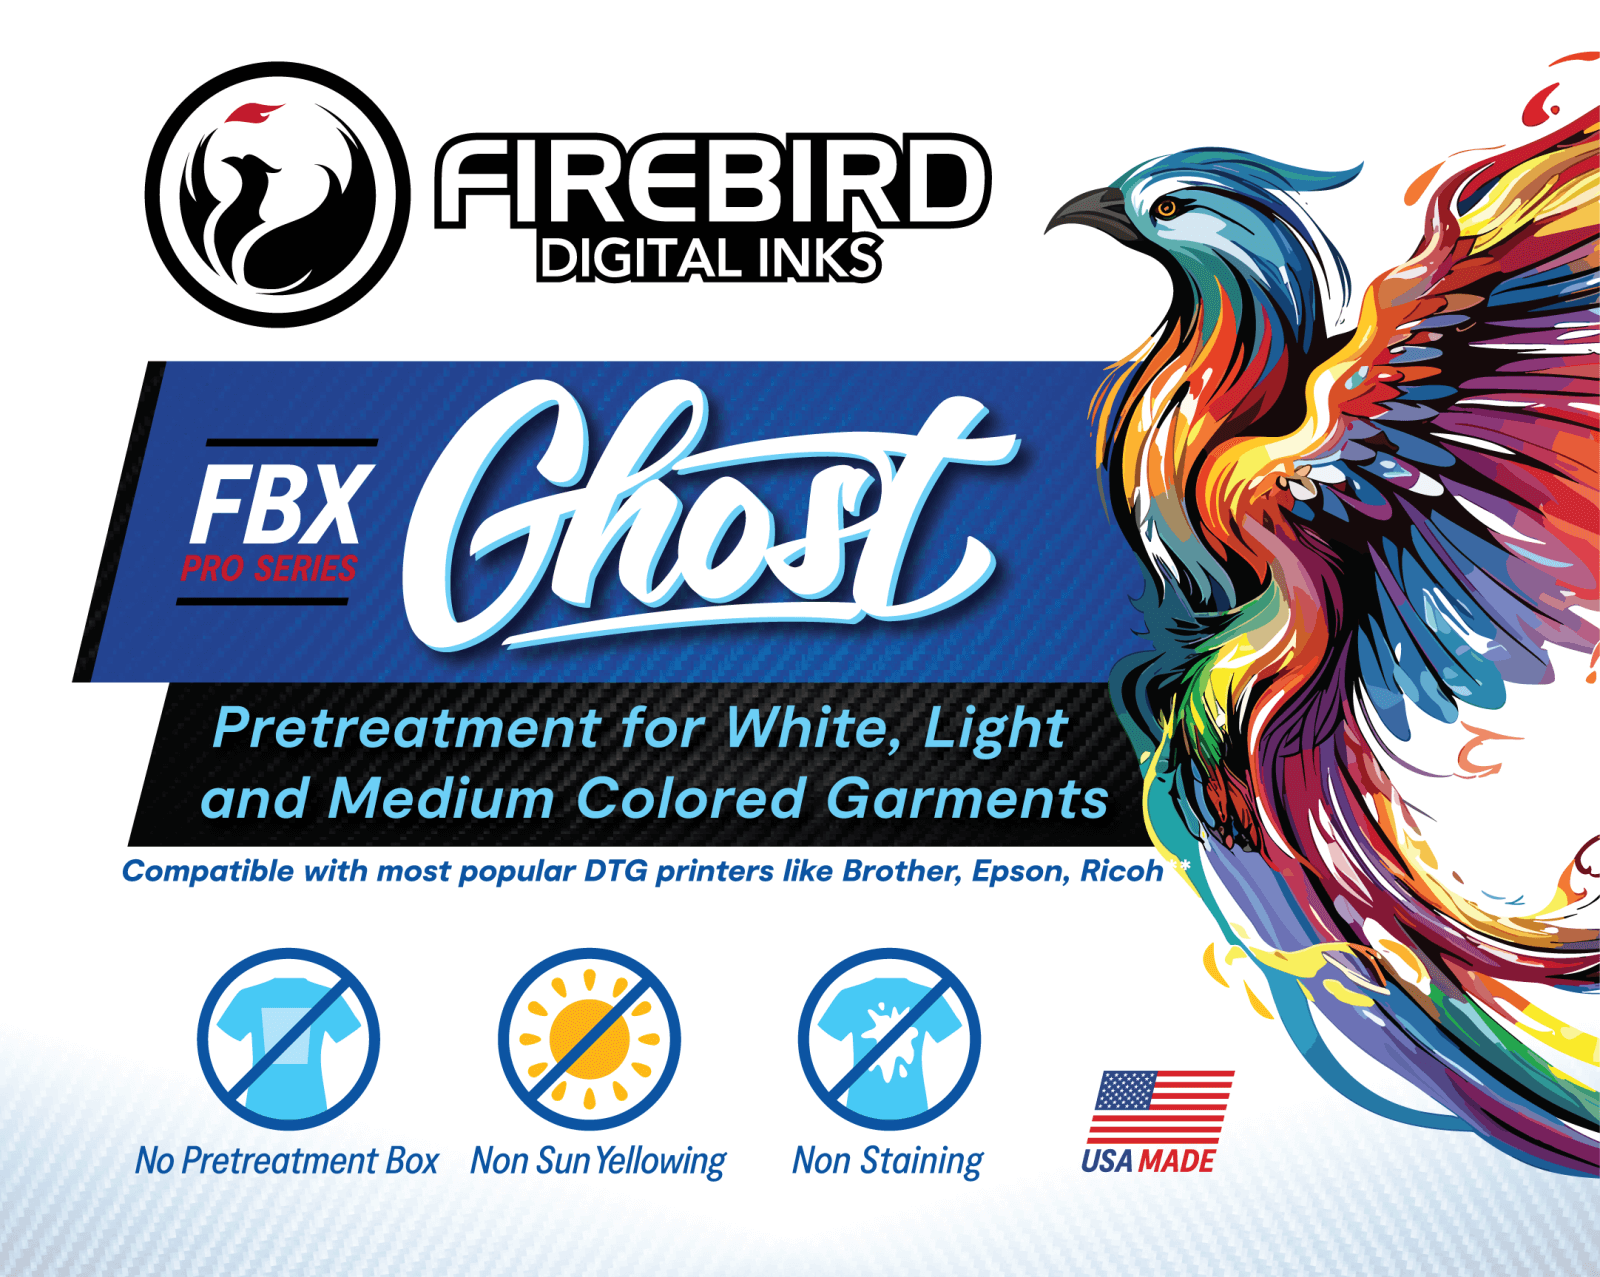 FBX Ghost - Pretreatment for White, Light and Medium Colored Garments